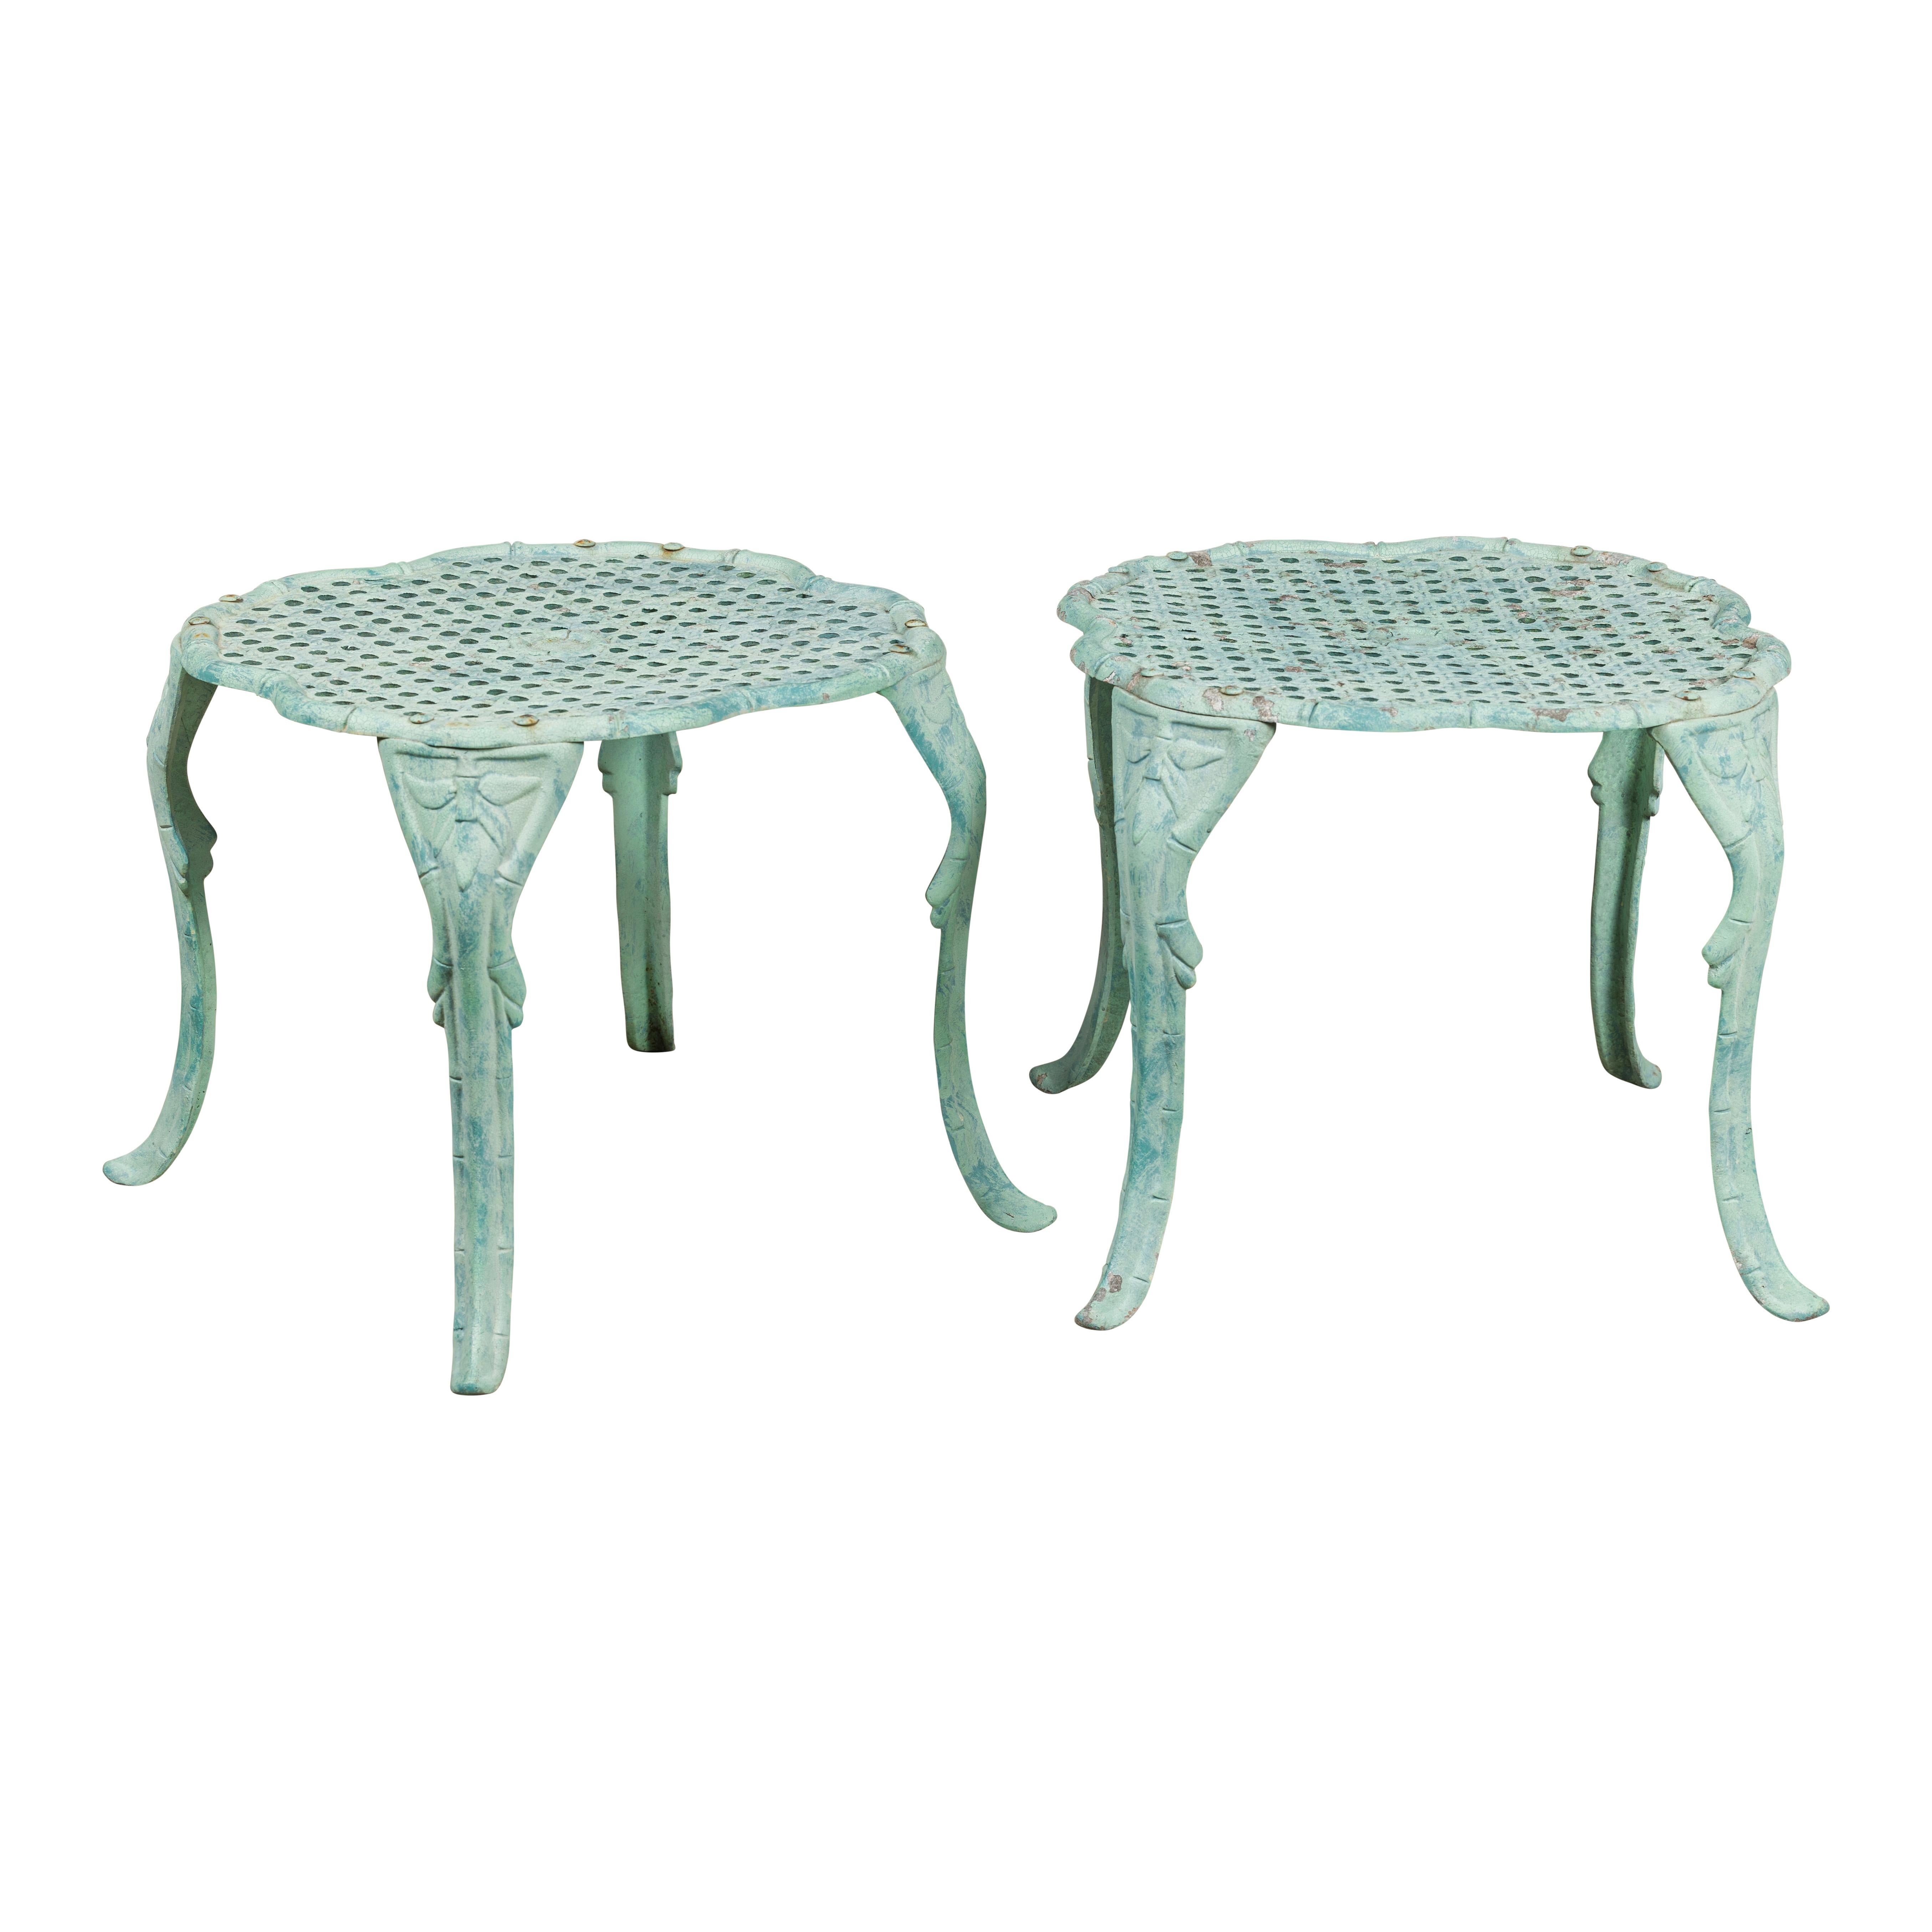 Midcentury Green Painted Cast Iron French Side Tables with Wicker Style Tops For Sale 8